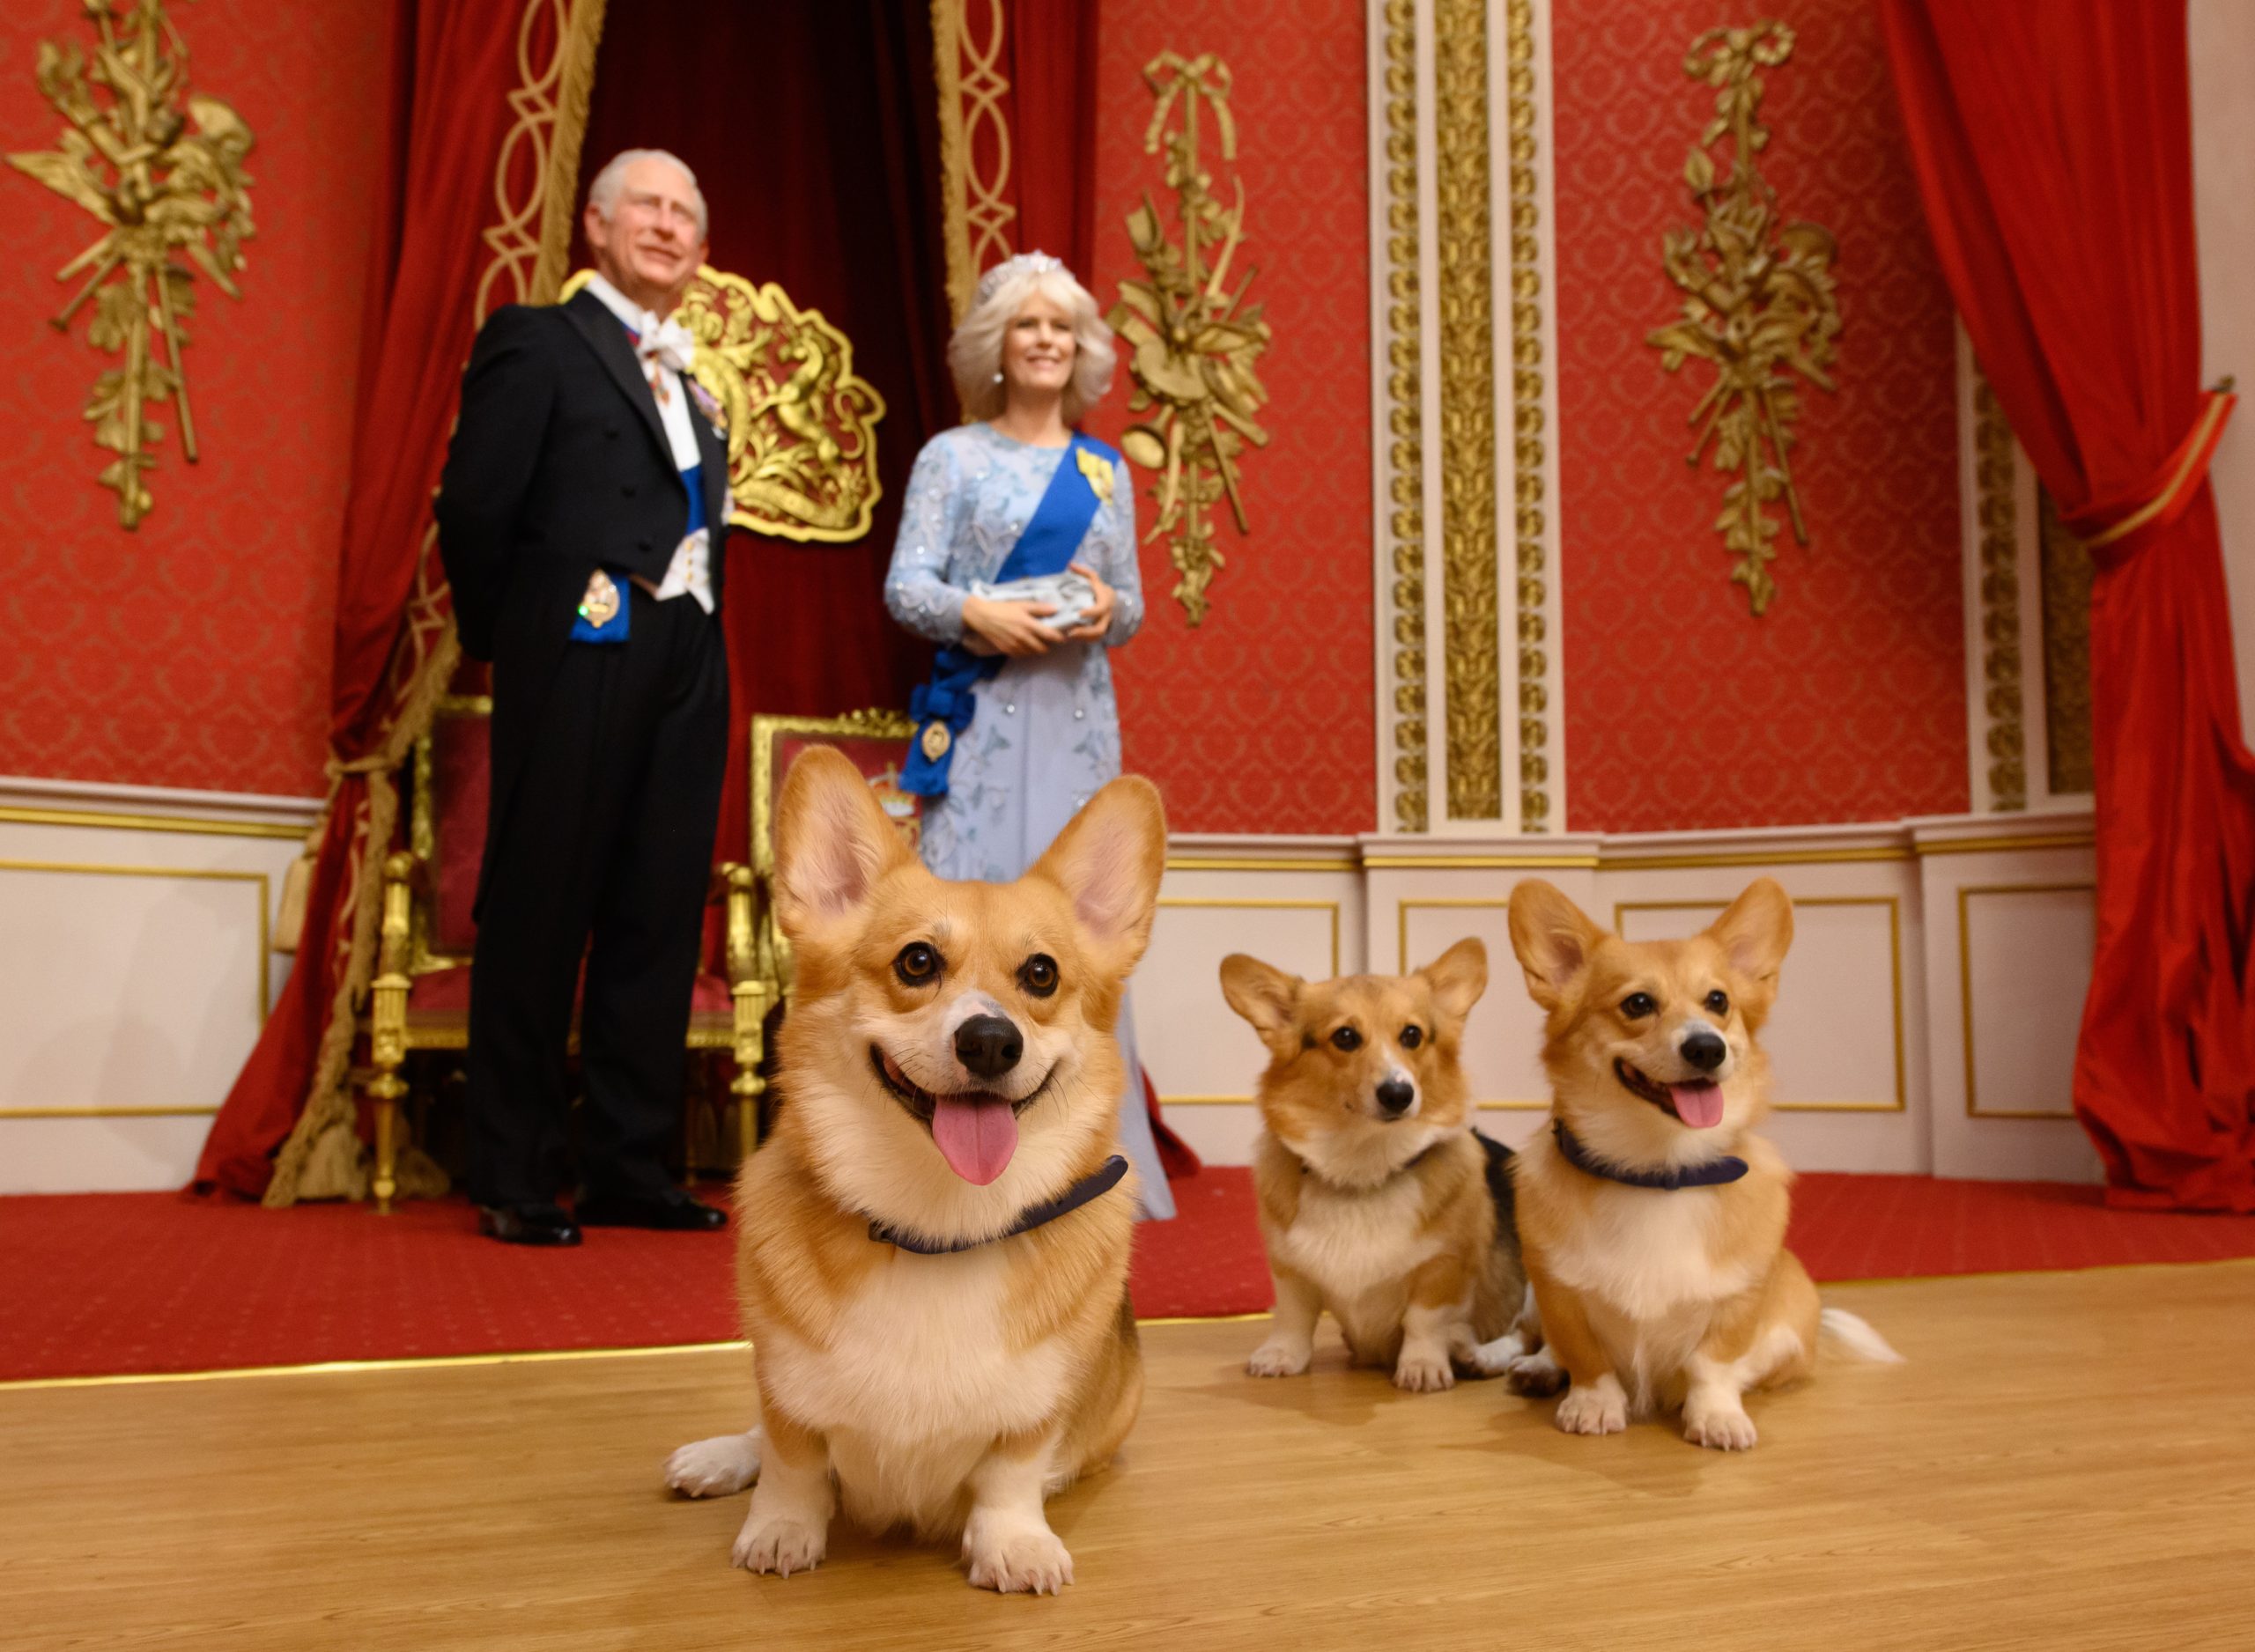 madame-tussauds-has-a-new-royal-display-ahead-of-the-king’s-coronation